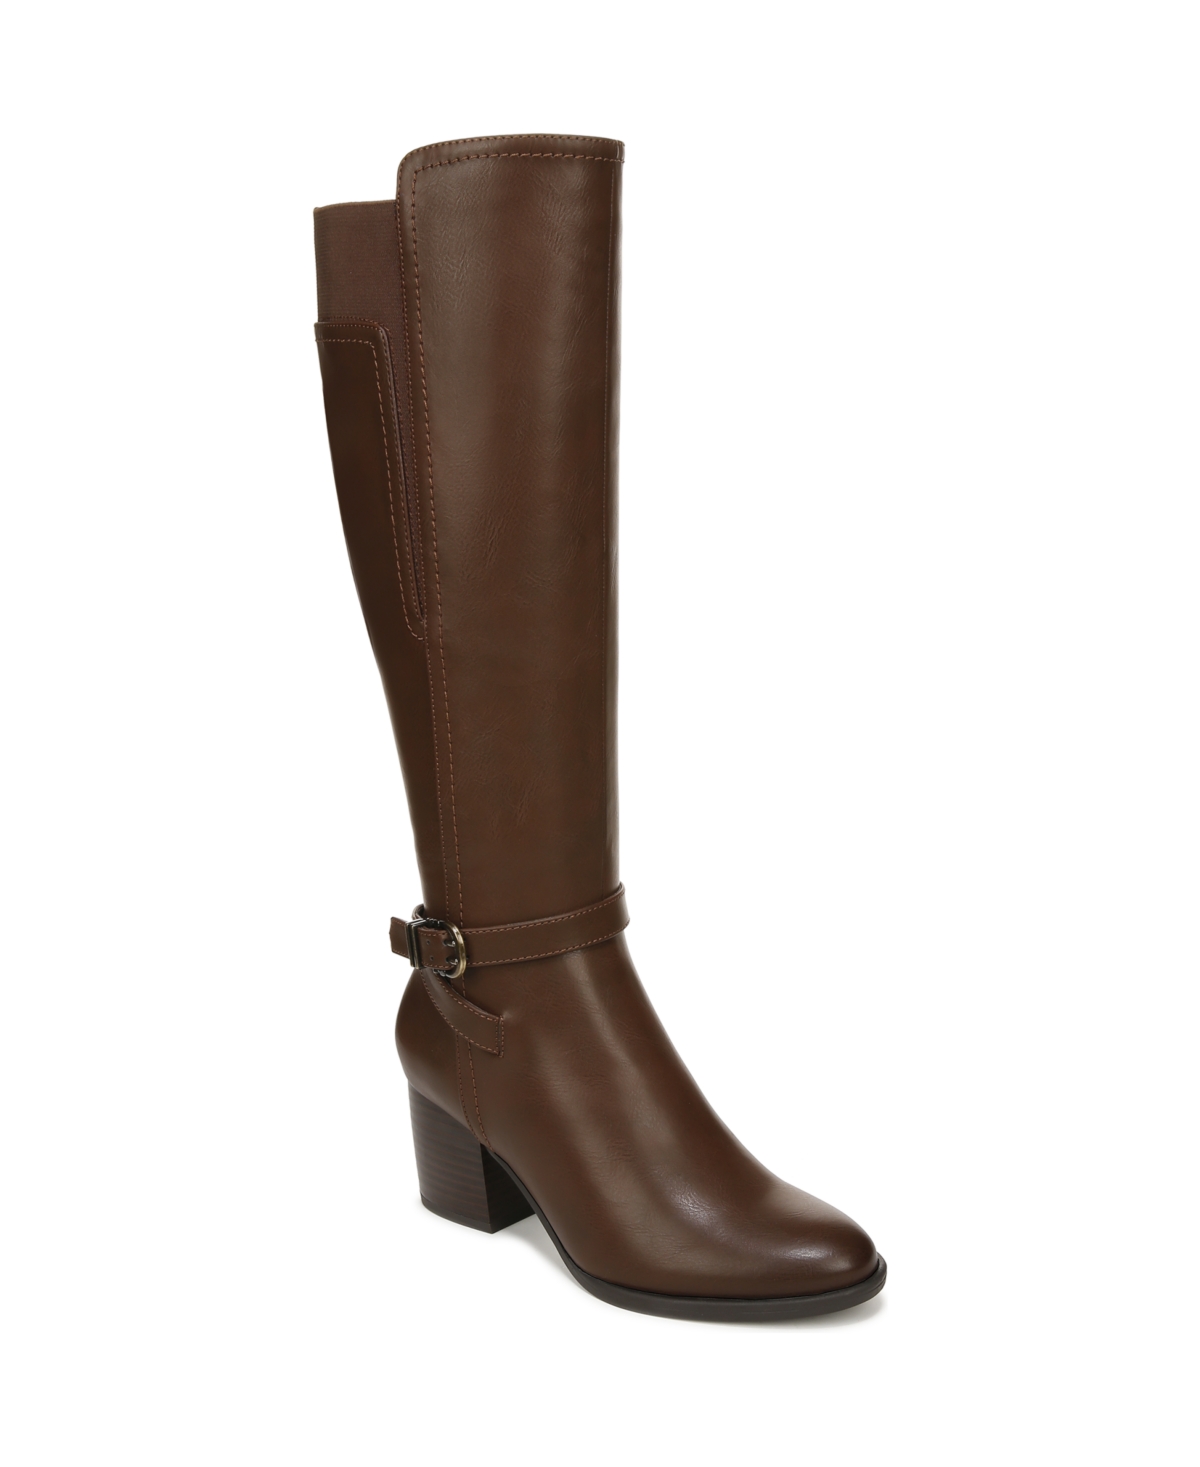 Uptown Wide Calf Knee High Boots - Dark Brown Faux Leather